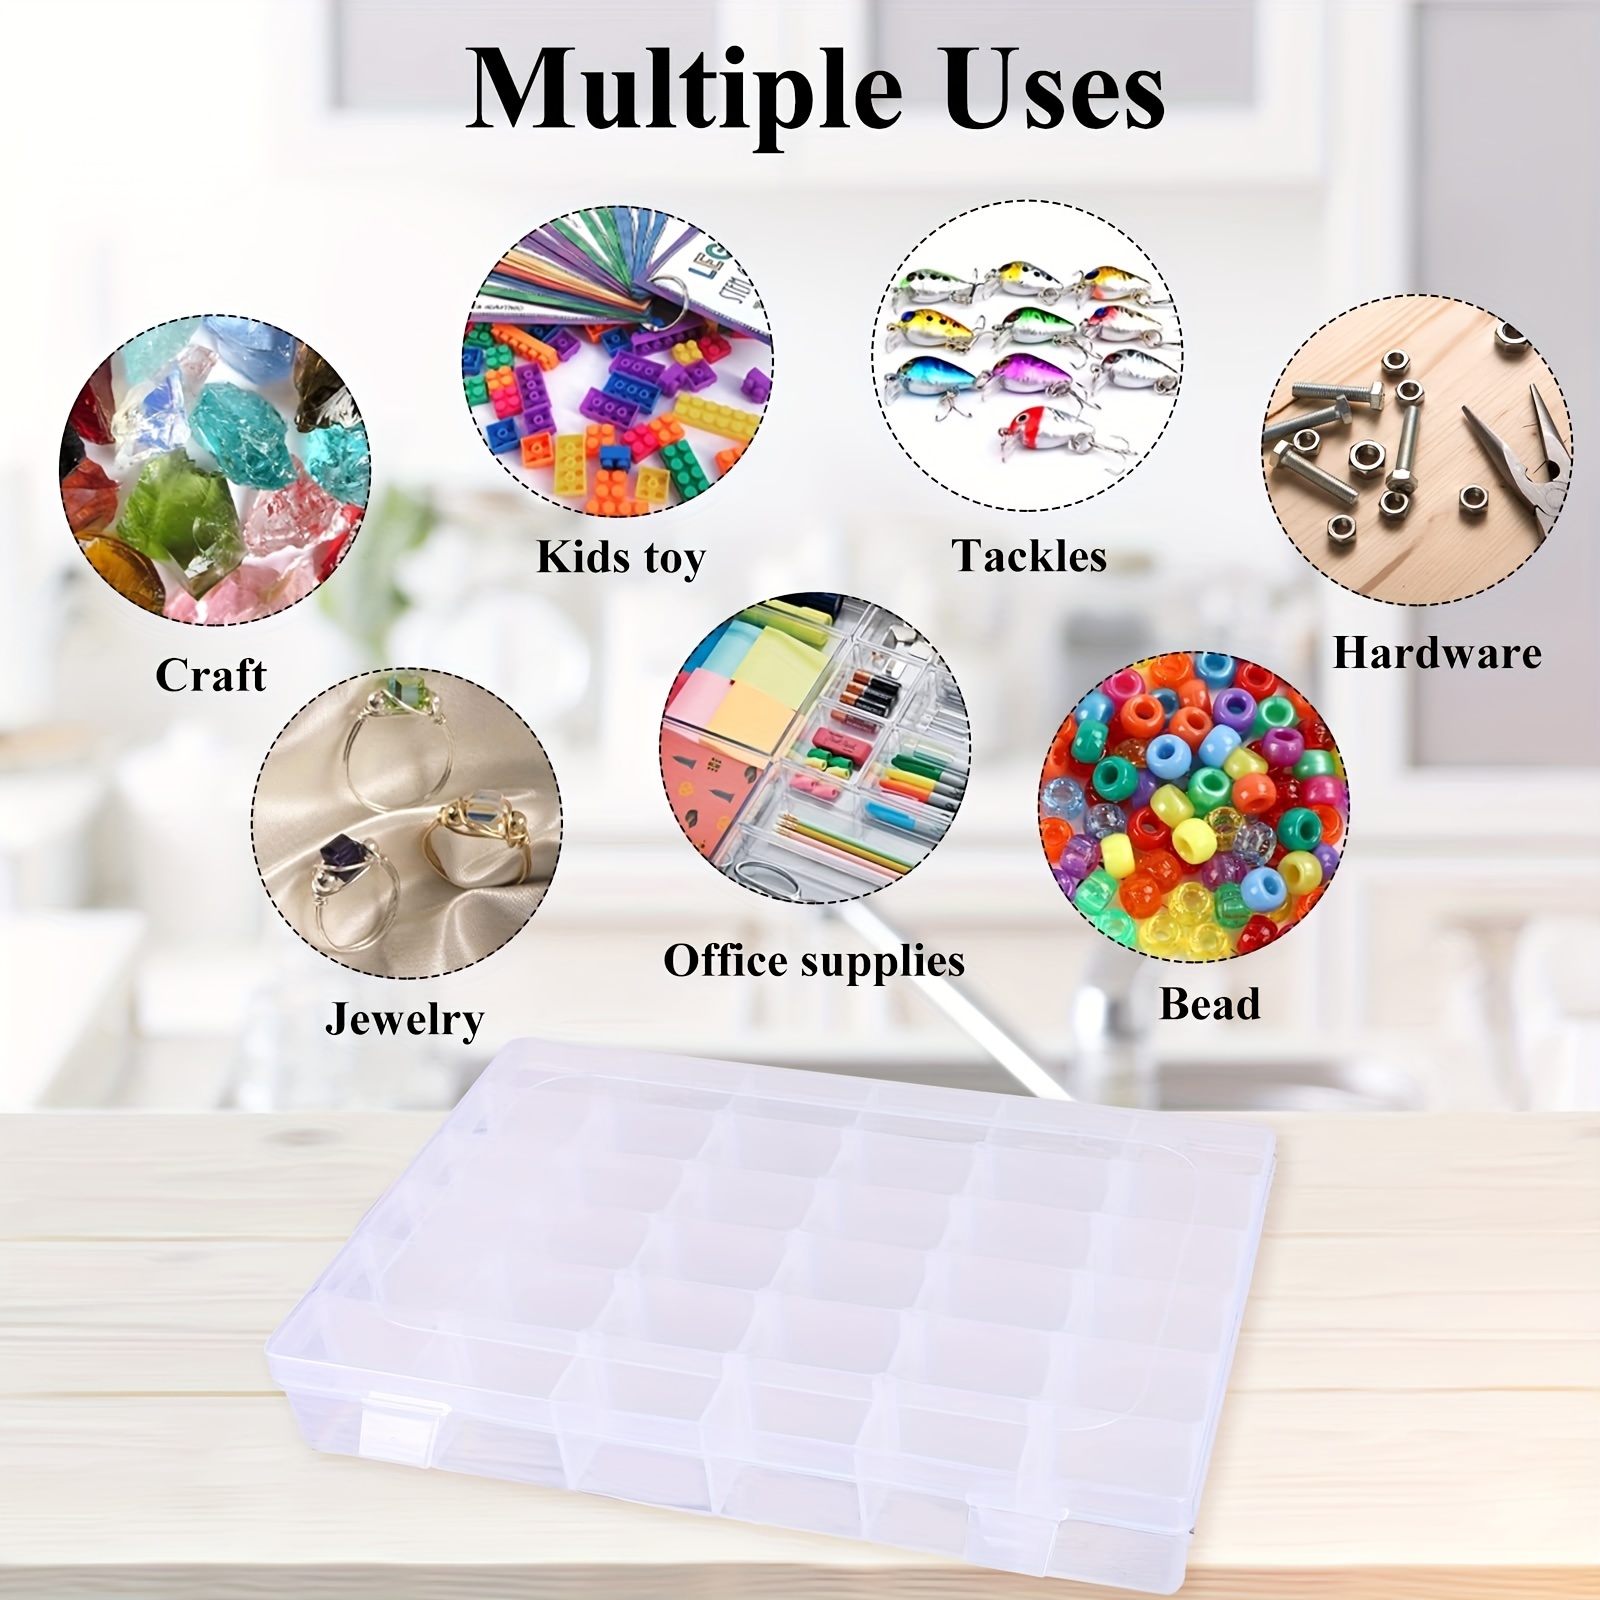 36 Slots Jewelry Organizer, Plastic Clear Jewelry Box with Movable  Dividers, Plastic Organizer Box Jewelry Storage Container for Beads Art DIY  Crafts